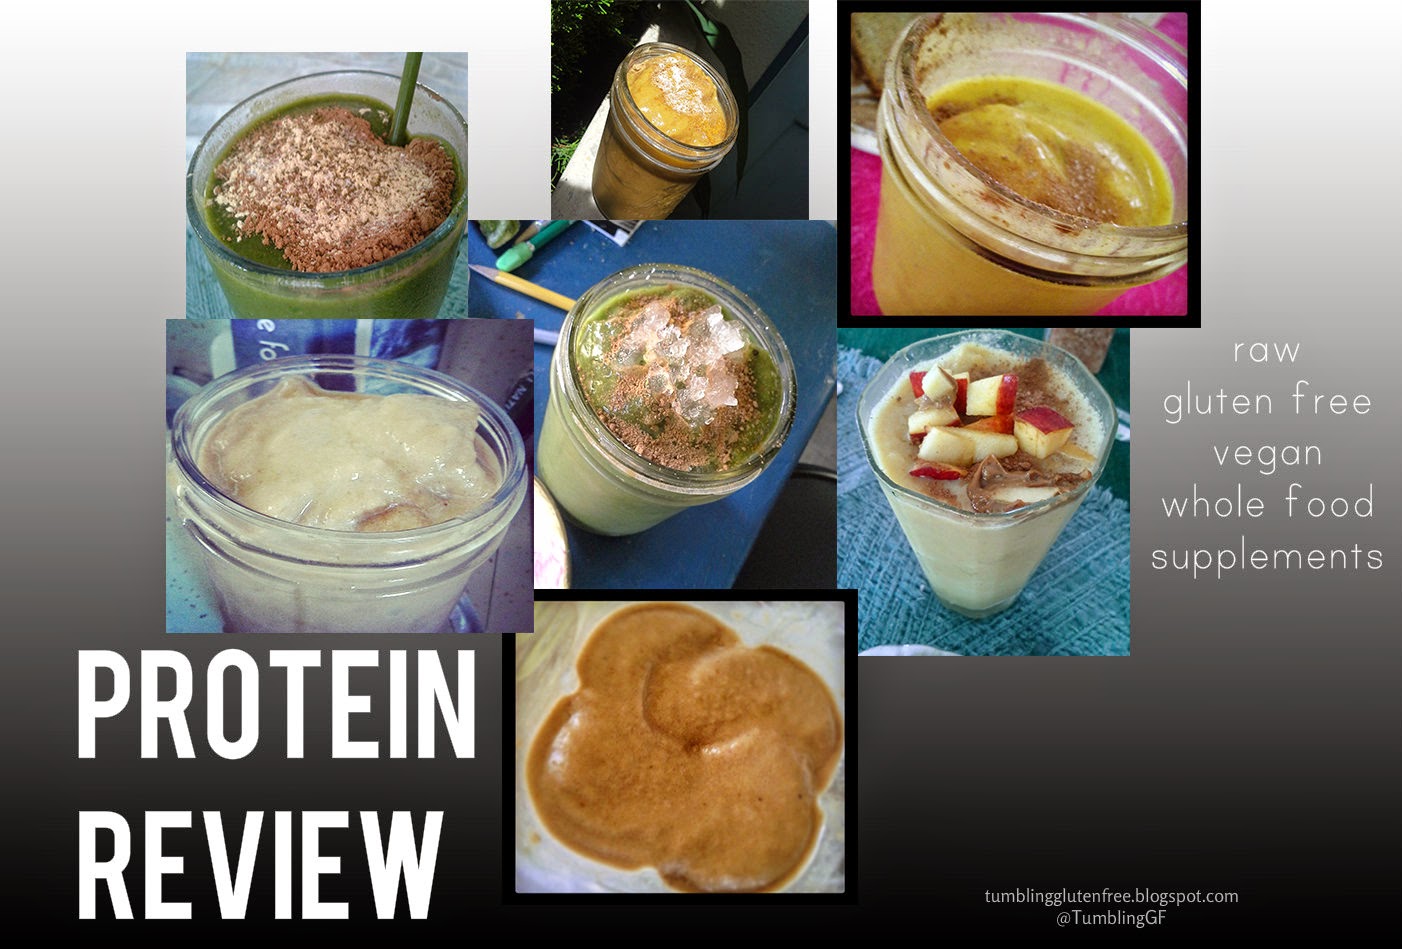 Product Review: Celiac Safe Protein Supplements